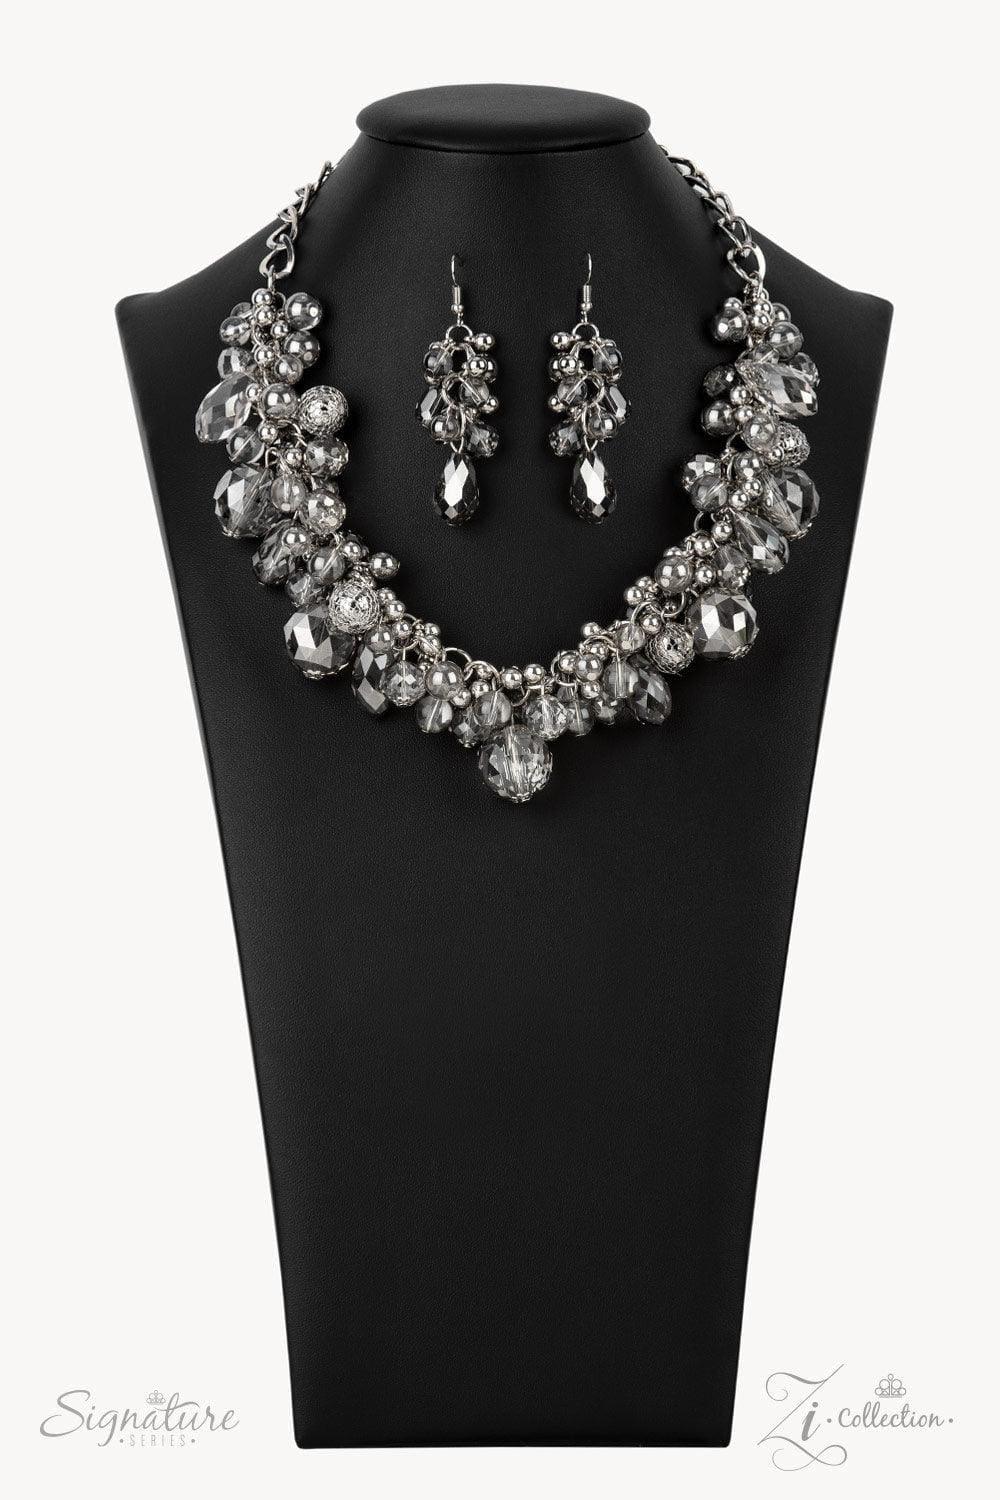 Paparazzi Accessories - The Tommie - 2021 Signature Zi Collection Necklace - Bling by JessieK